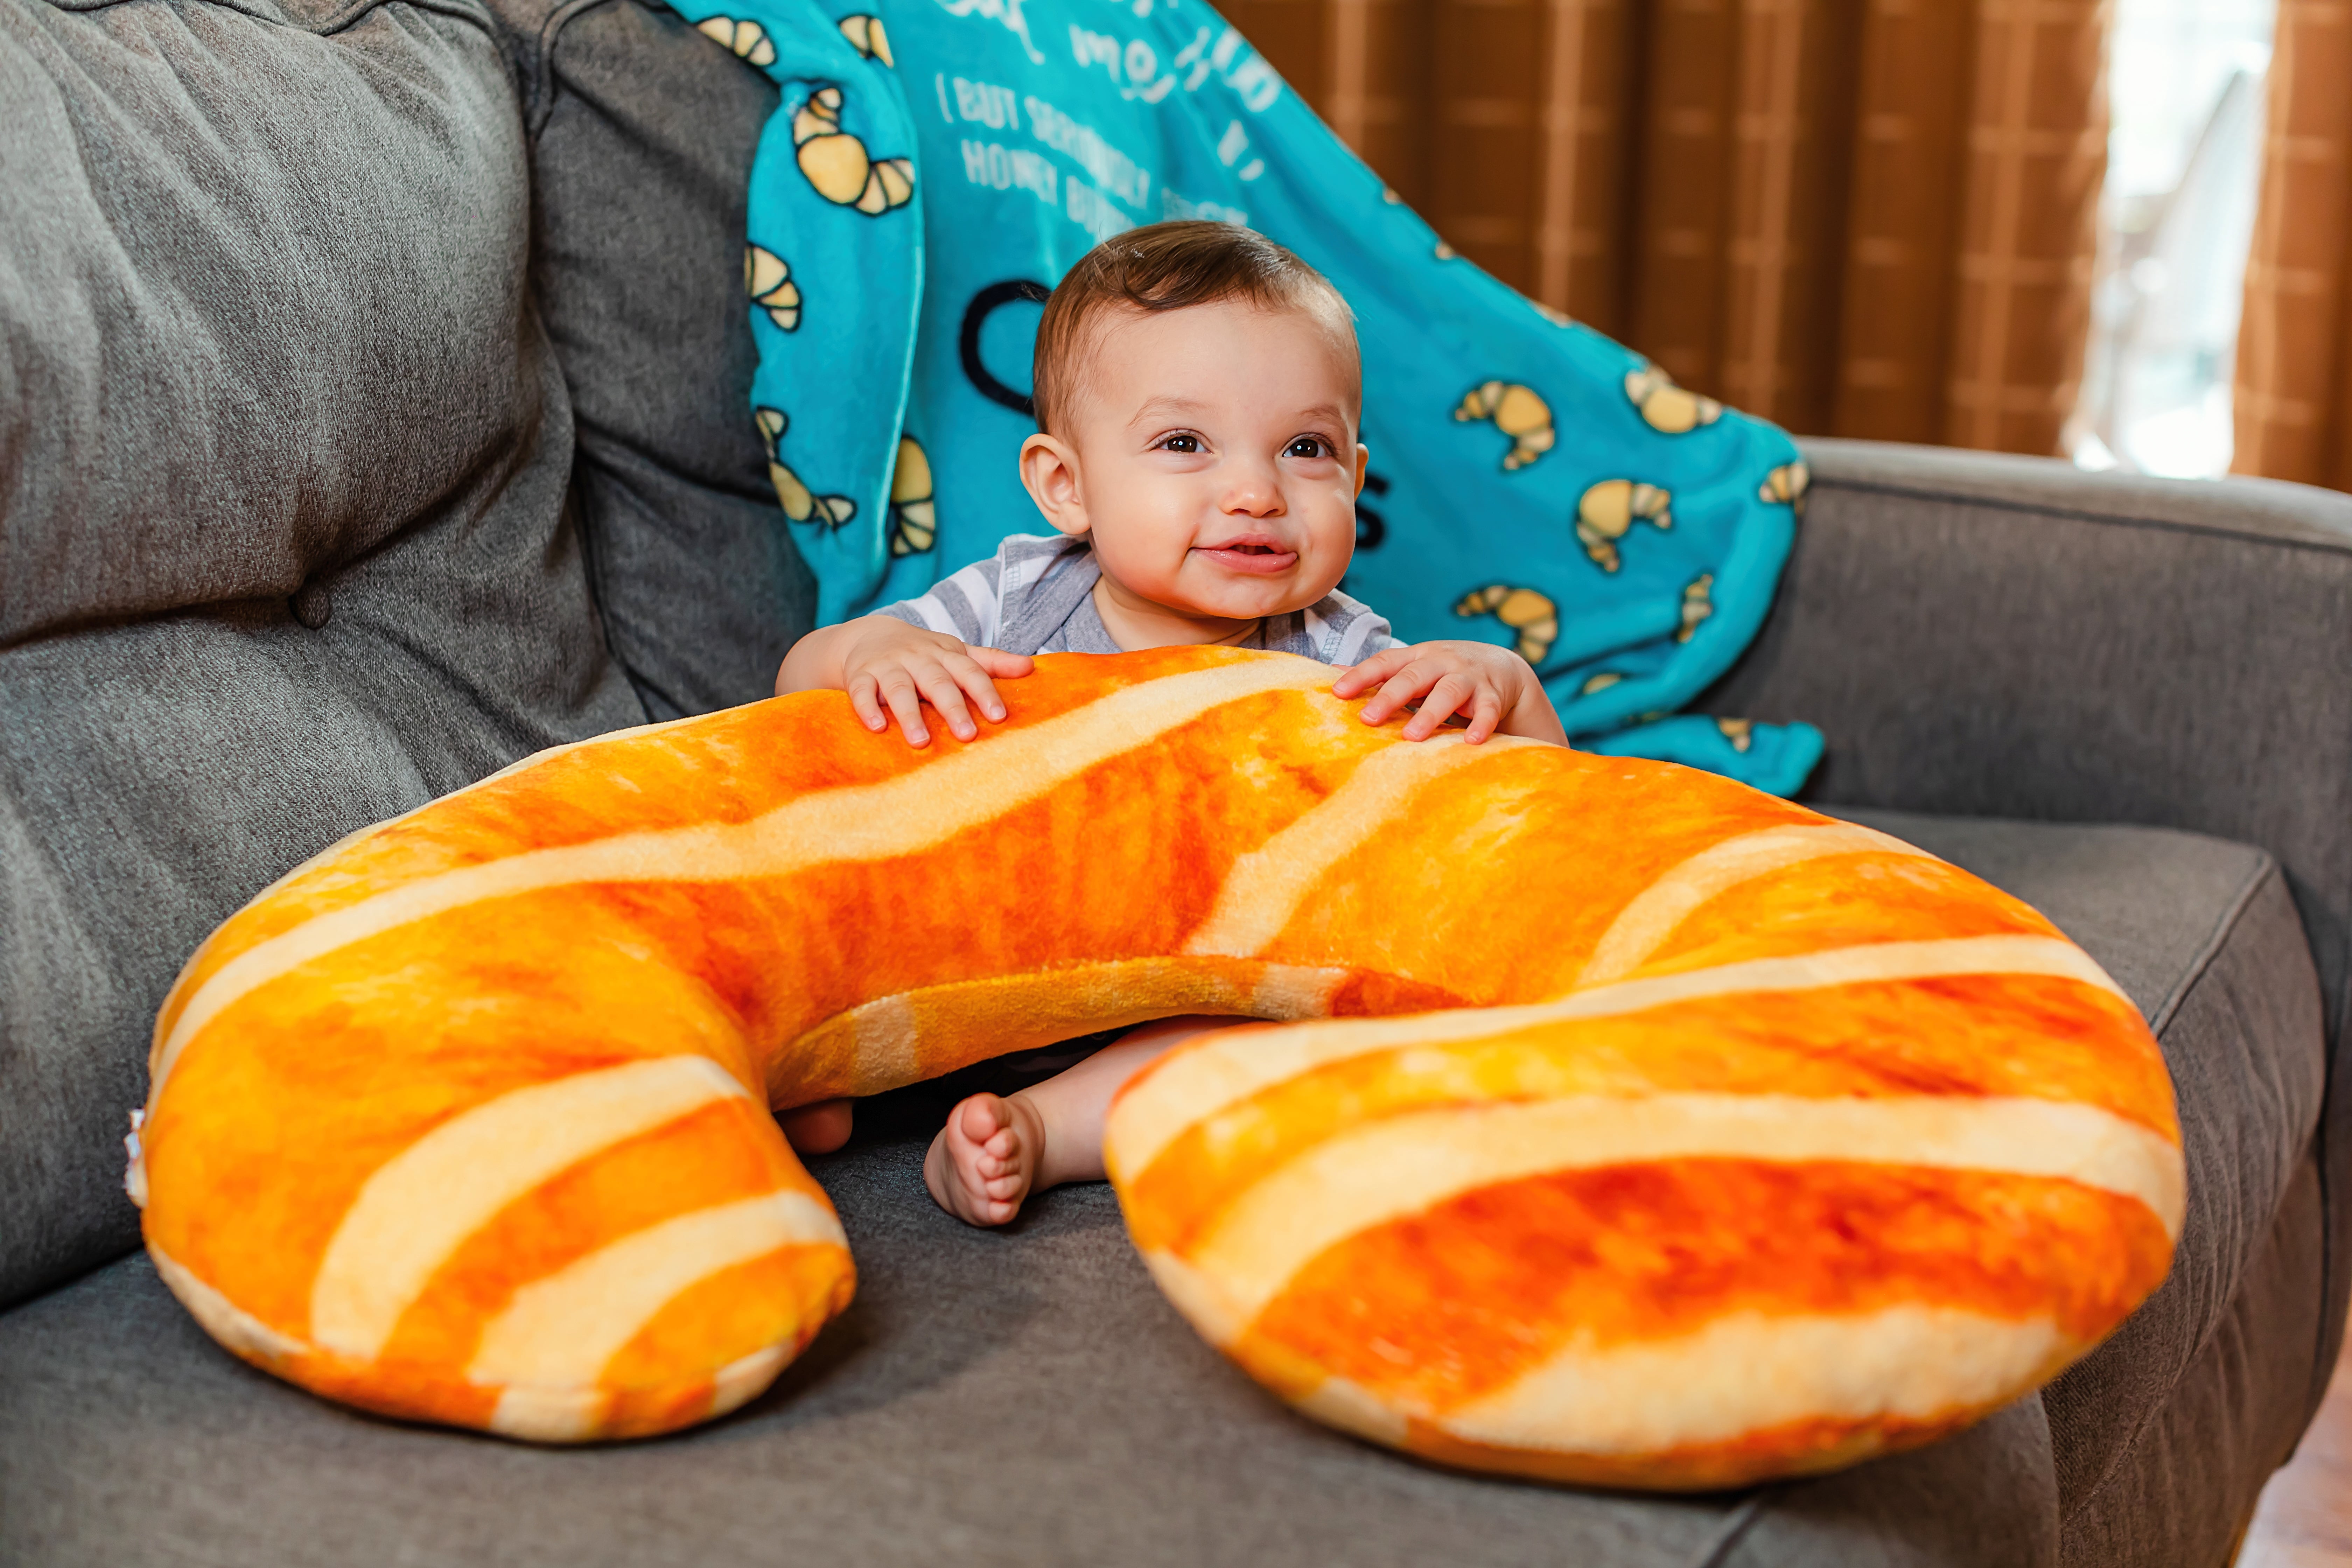 This Giant Croissant Body Pillow Is Four Cozy Feet Long